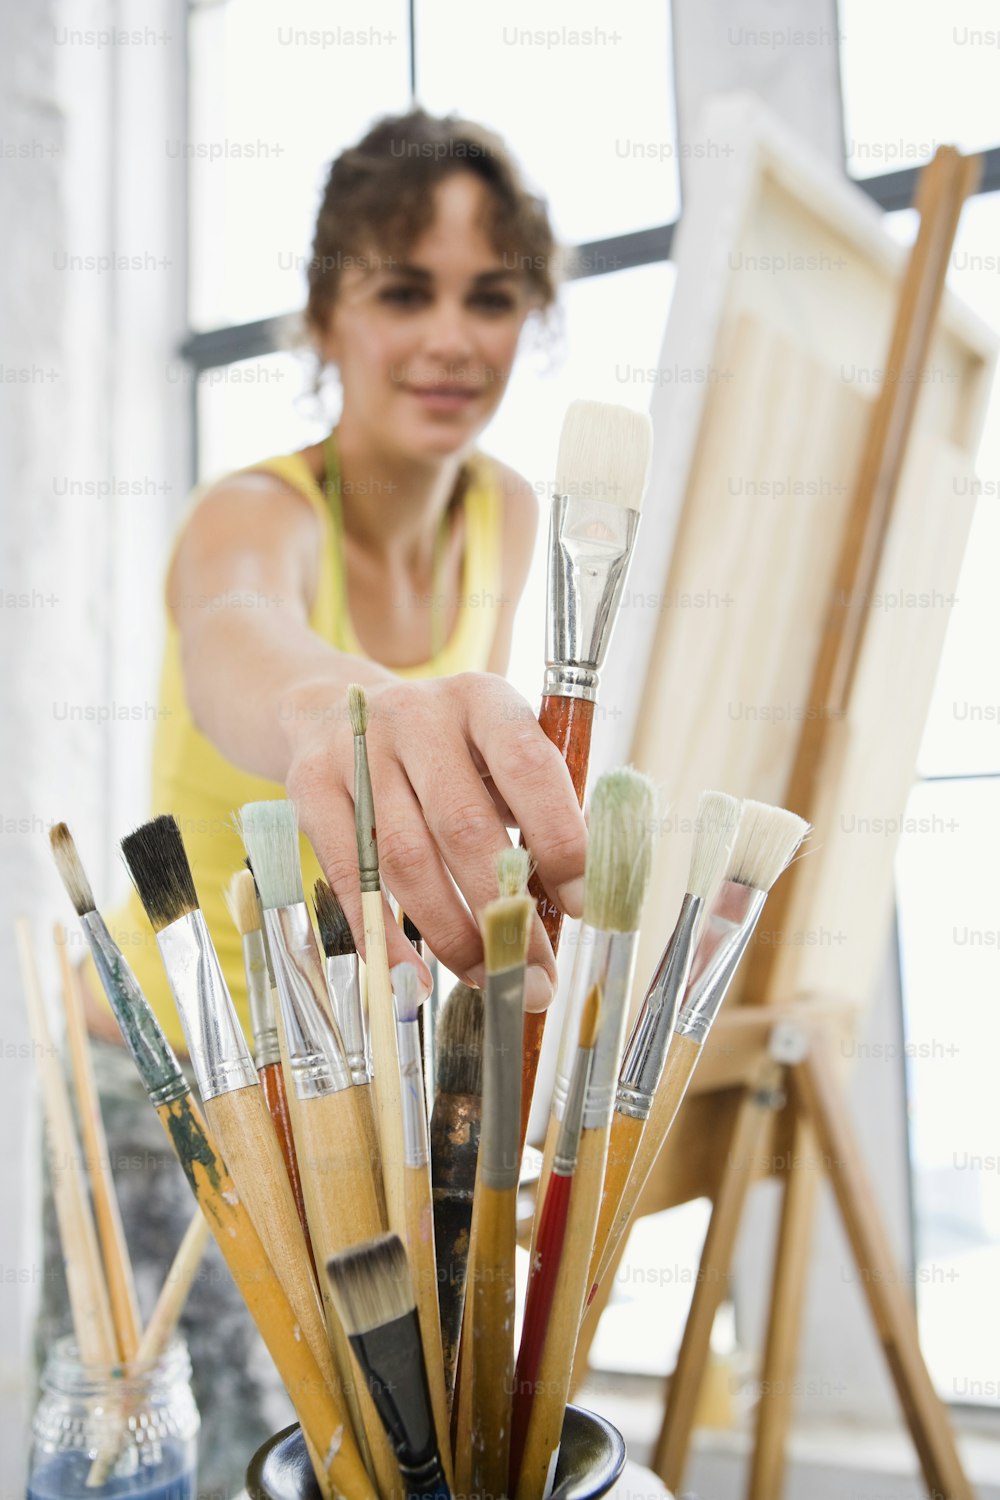 a woman is holding a paintbrush in a cup full of brushes